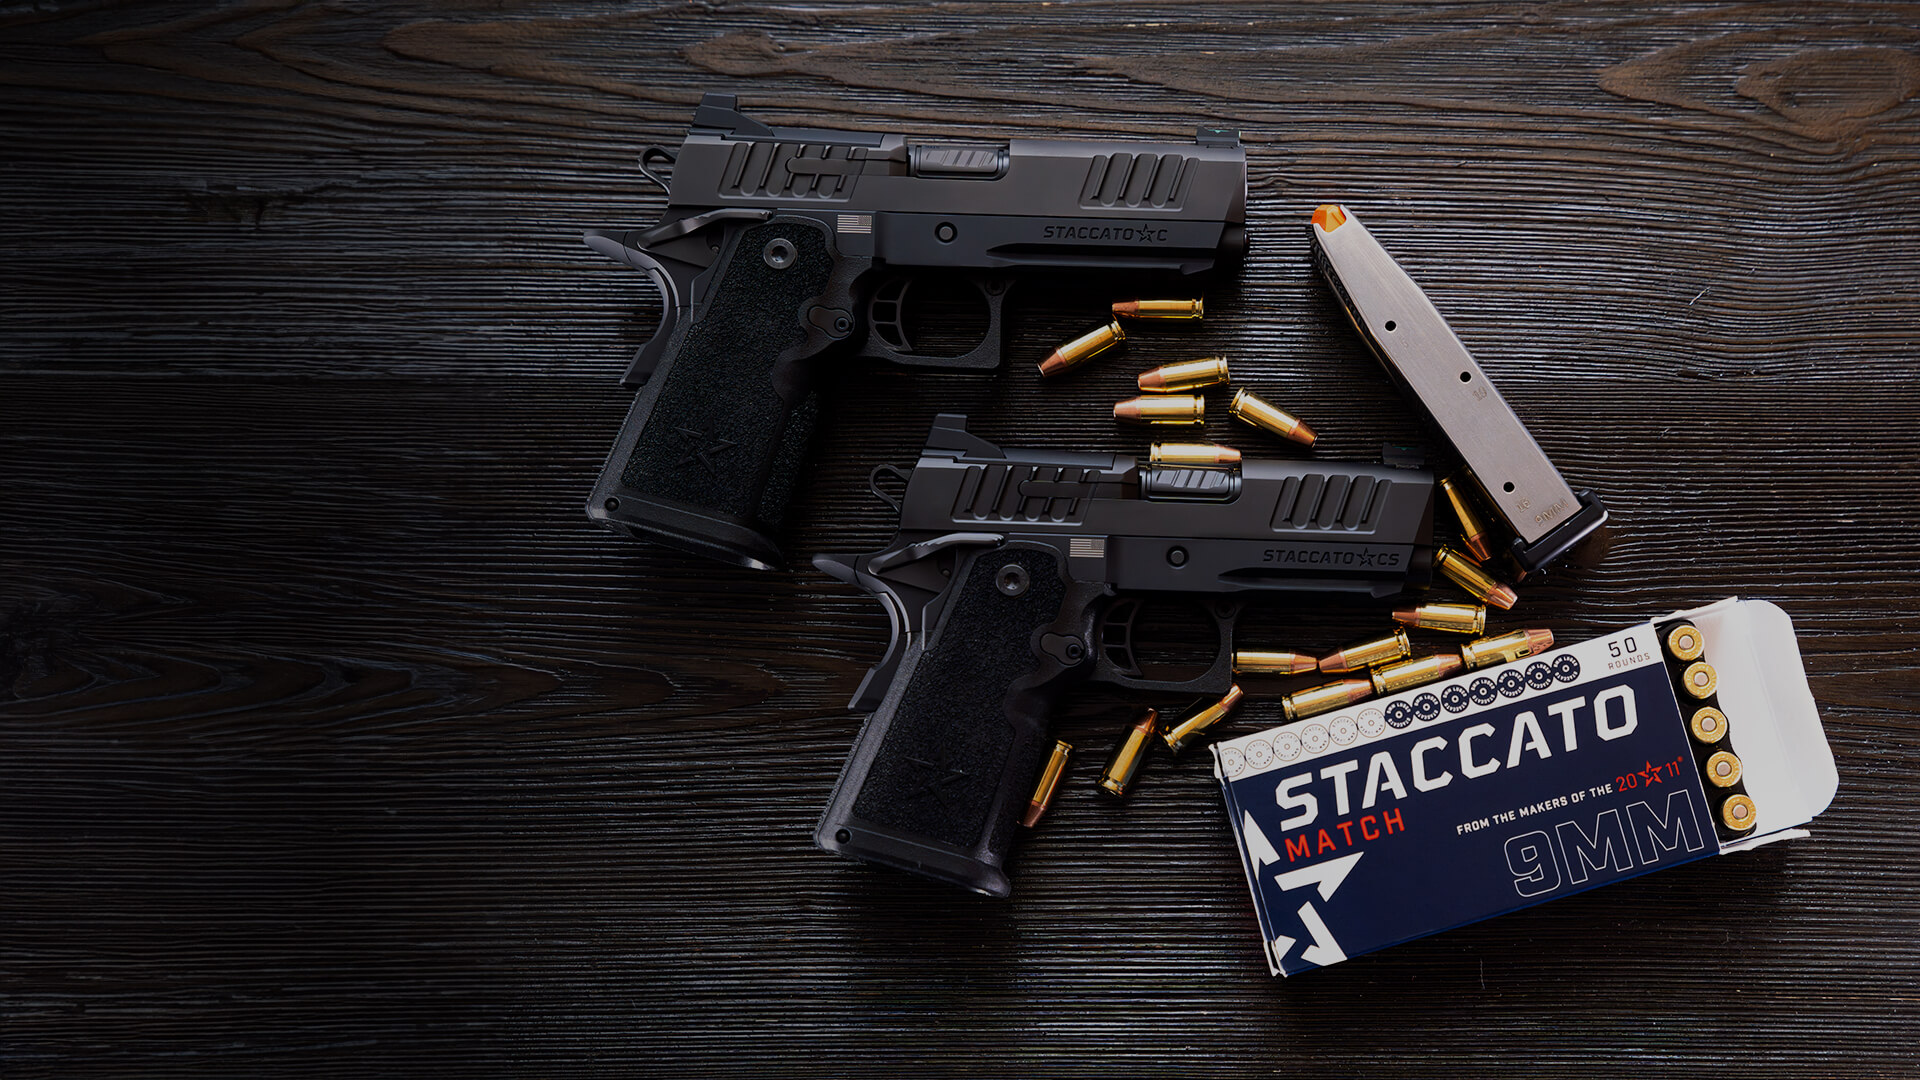 Heroes. - 2011 Staccato Handguns, For 2011 & Built Pistols, Staccato Accessories.